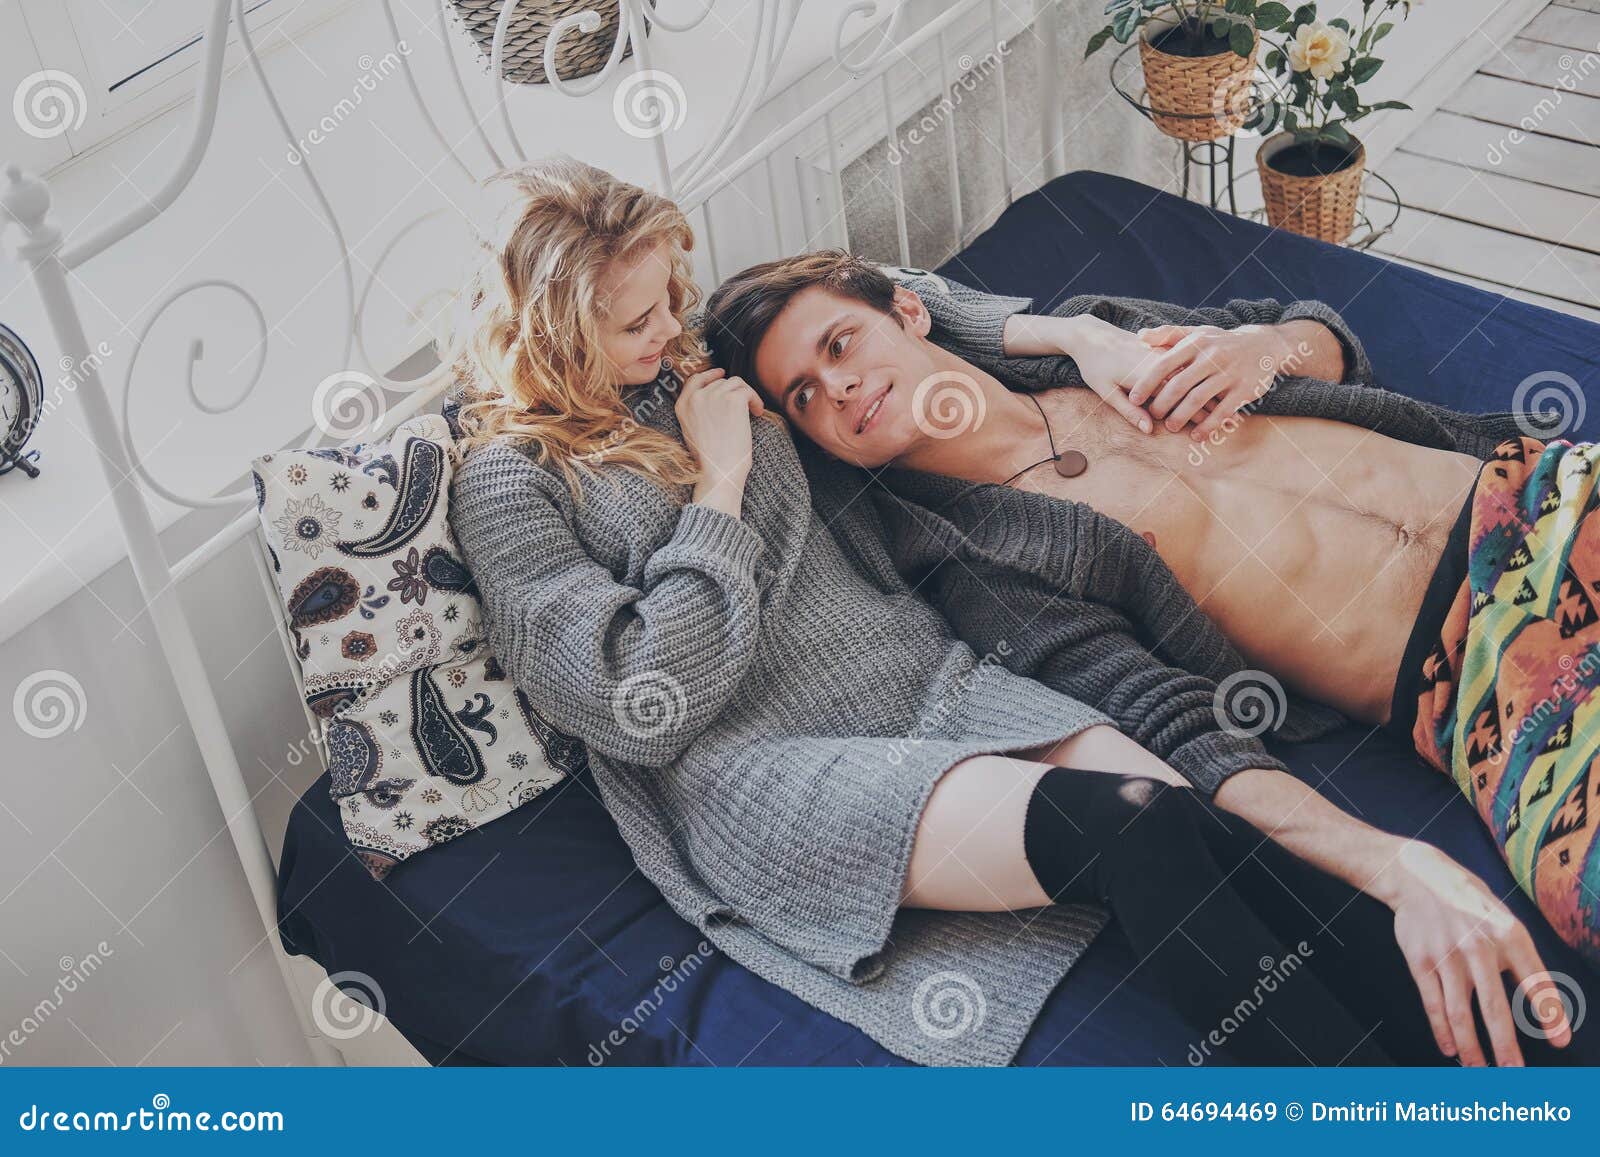 brooke dillard recommends picture of man and woman cuddling in bed pic